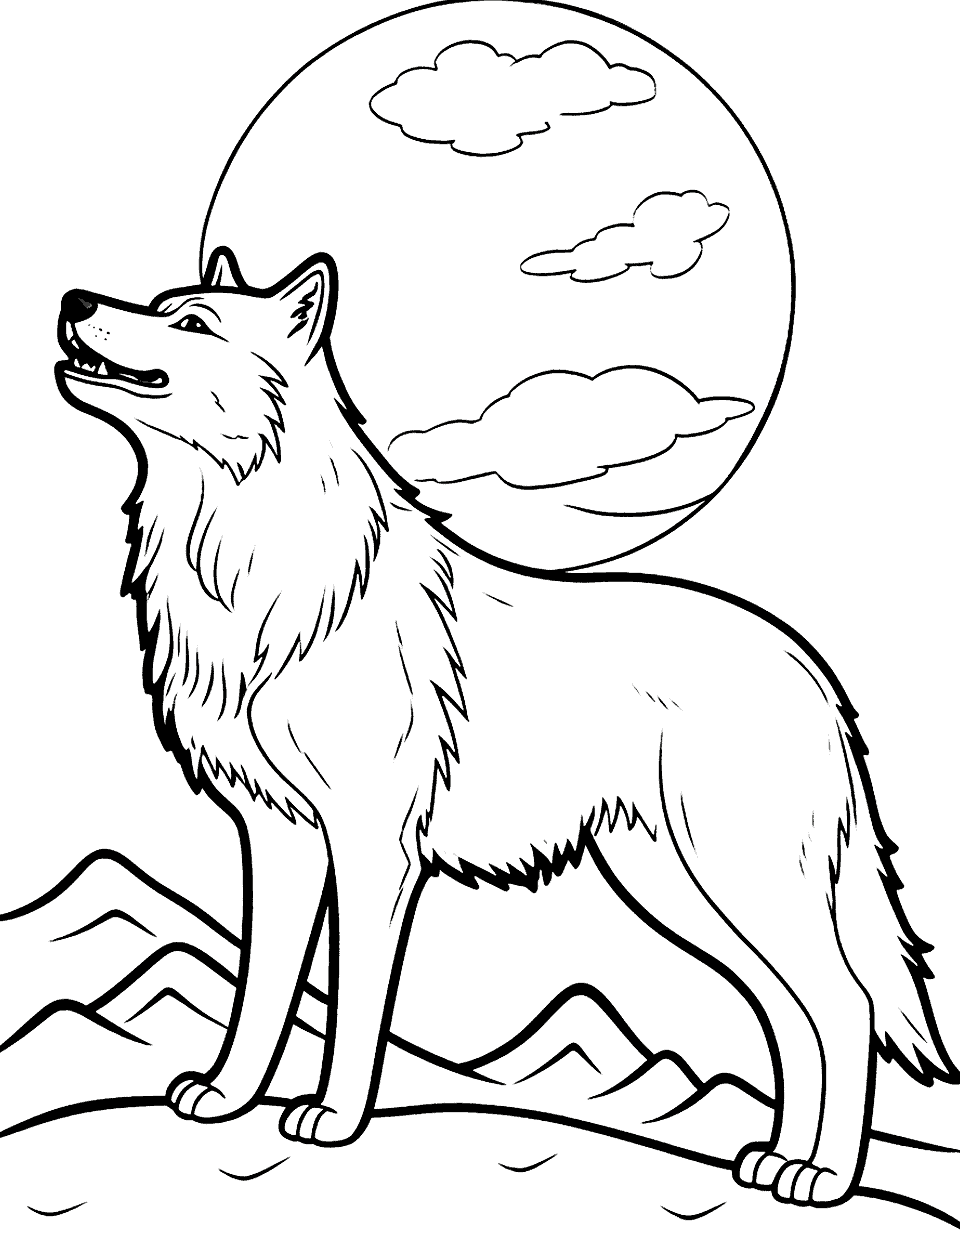 Wolf Howling Coloring Page - A lone wolf atop a hill, howling at night sky.